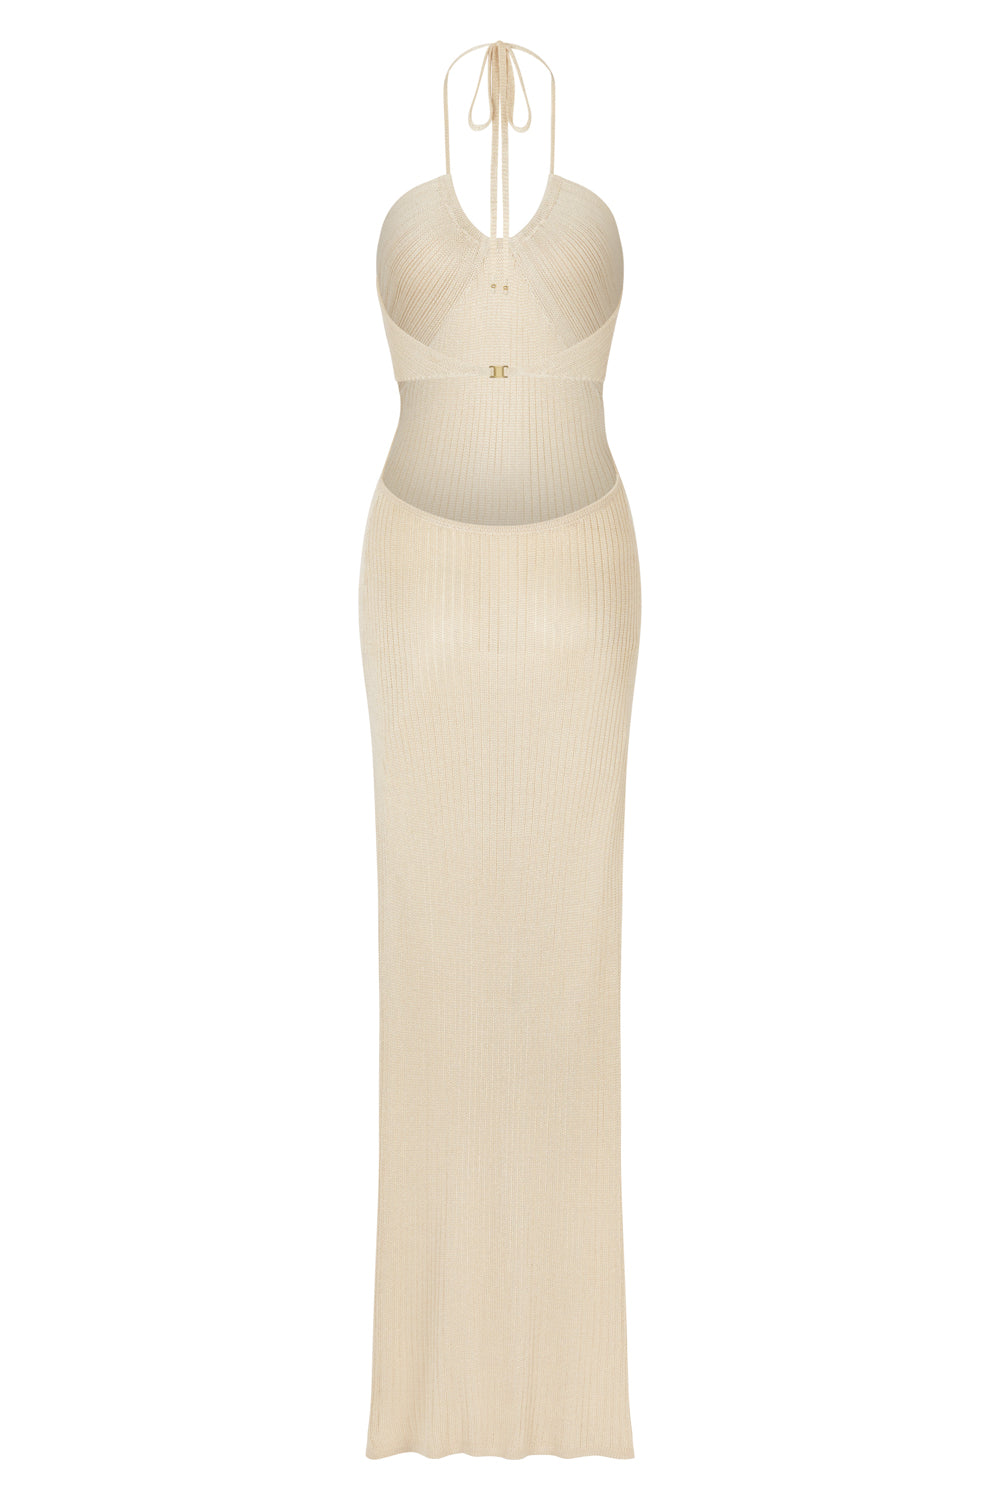 flook the label sia dress vanilla knit product image back